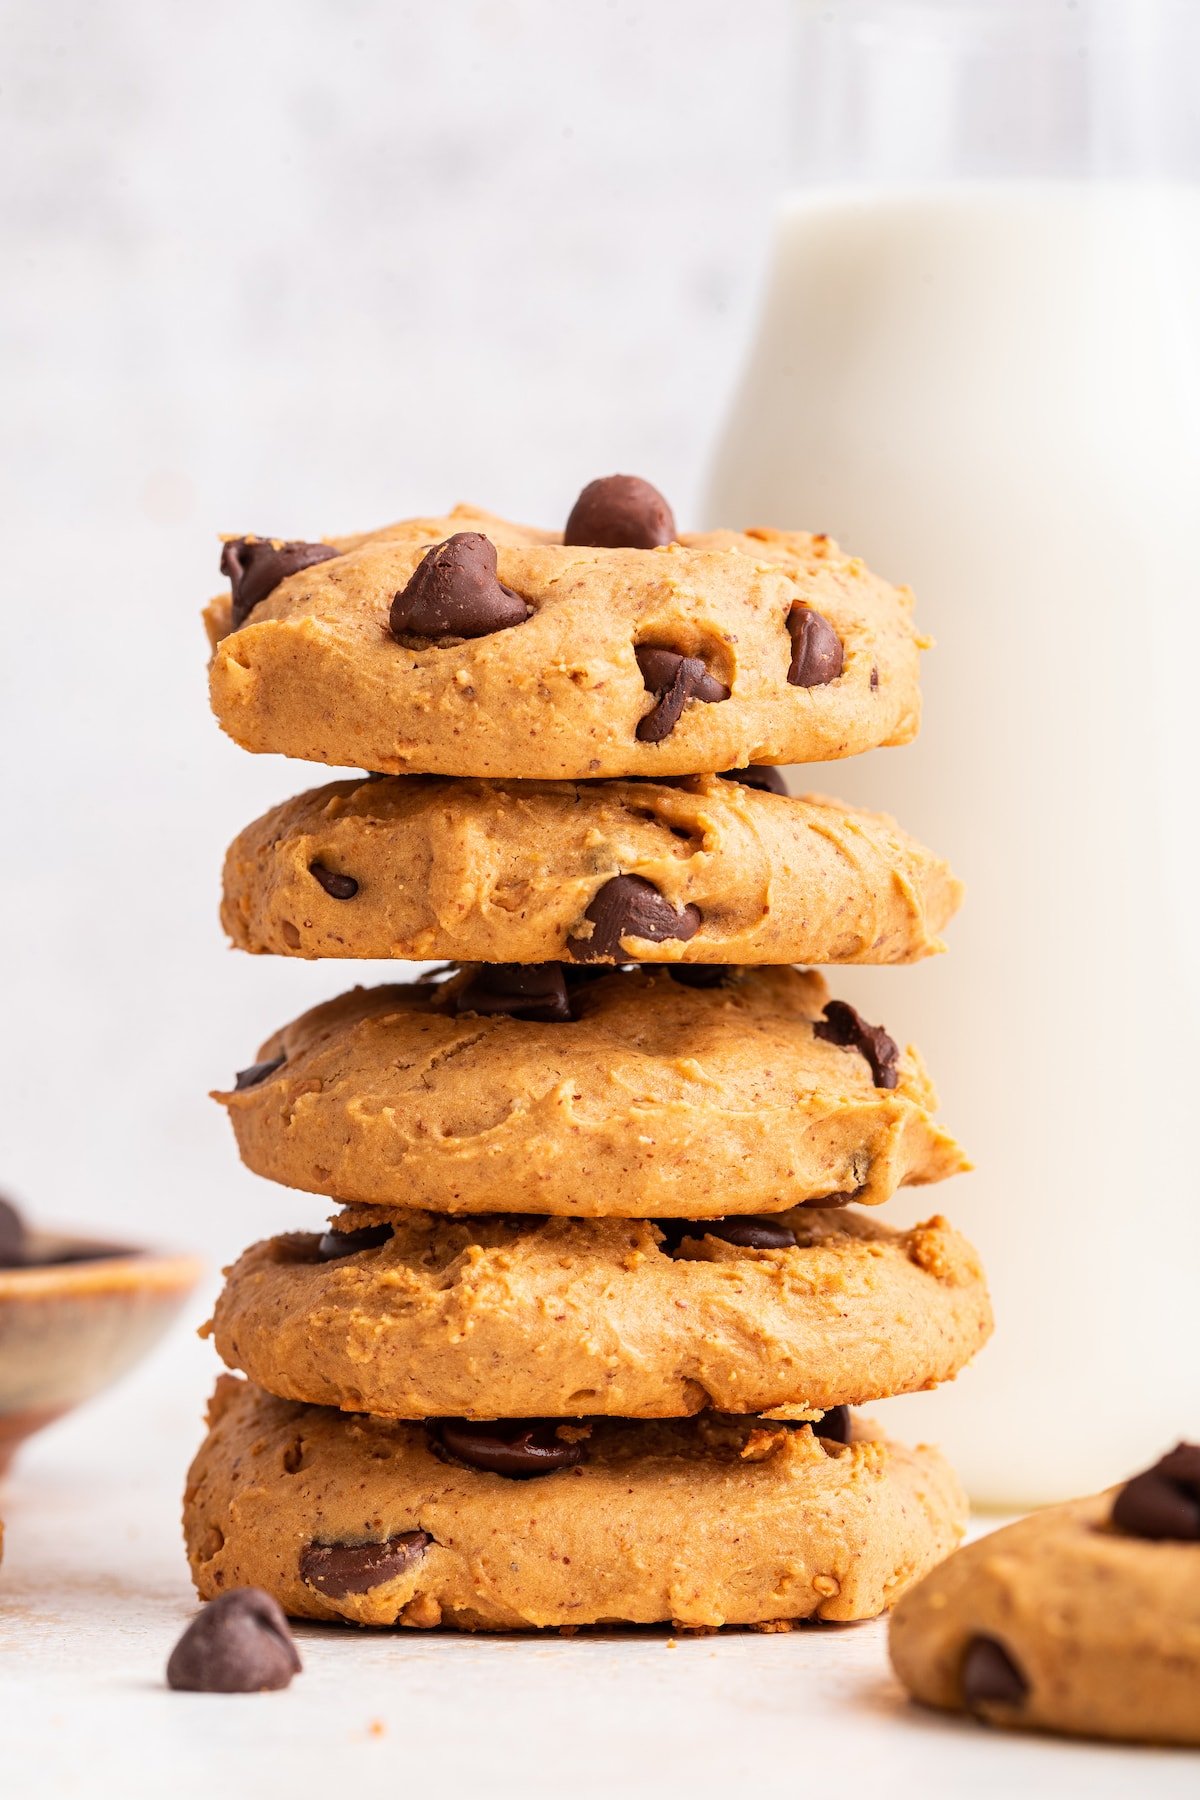 Multiple protein chocolate chip cookies stacked on one another.